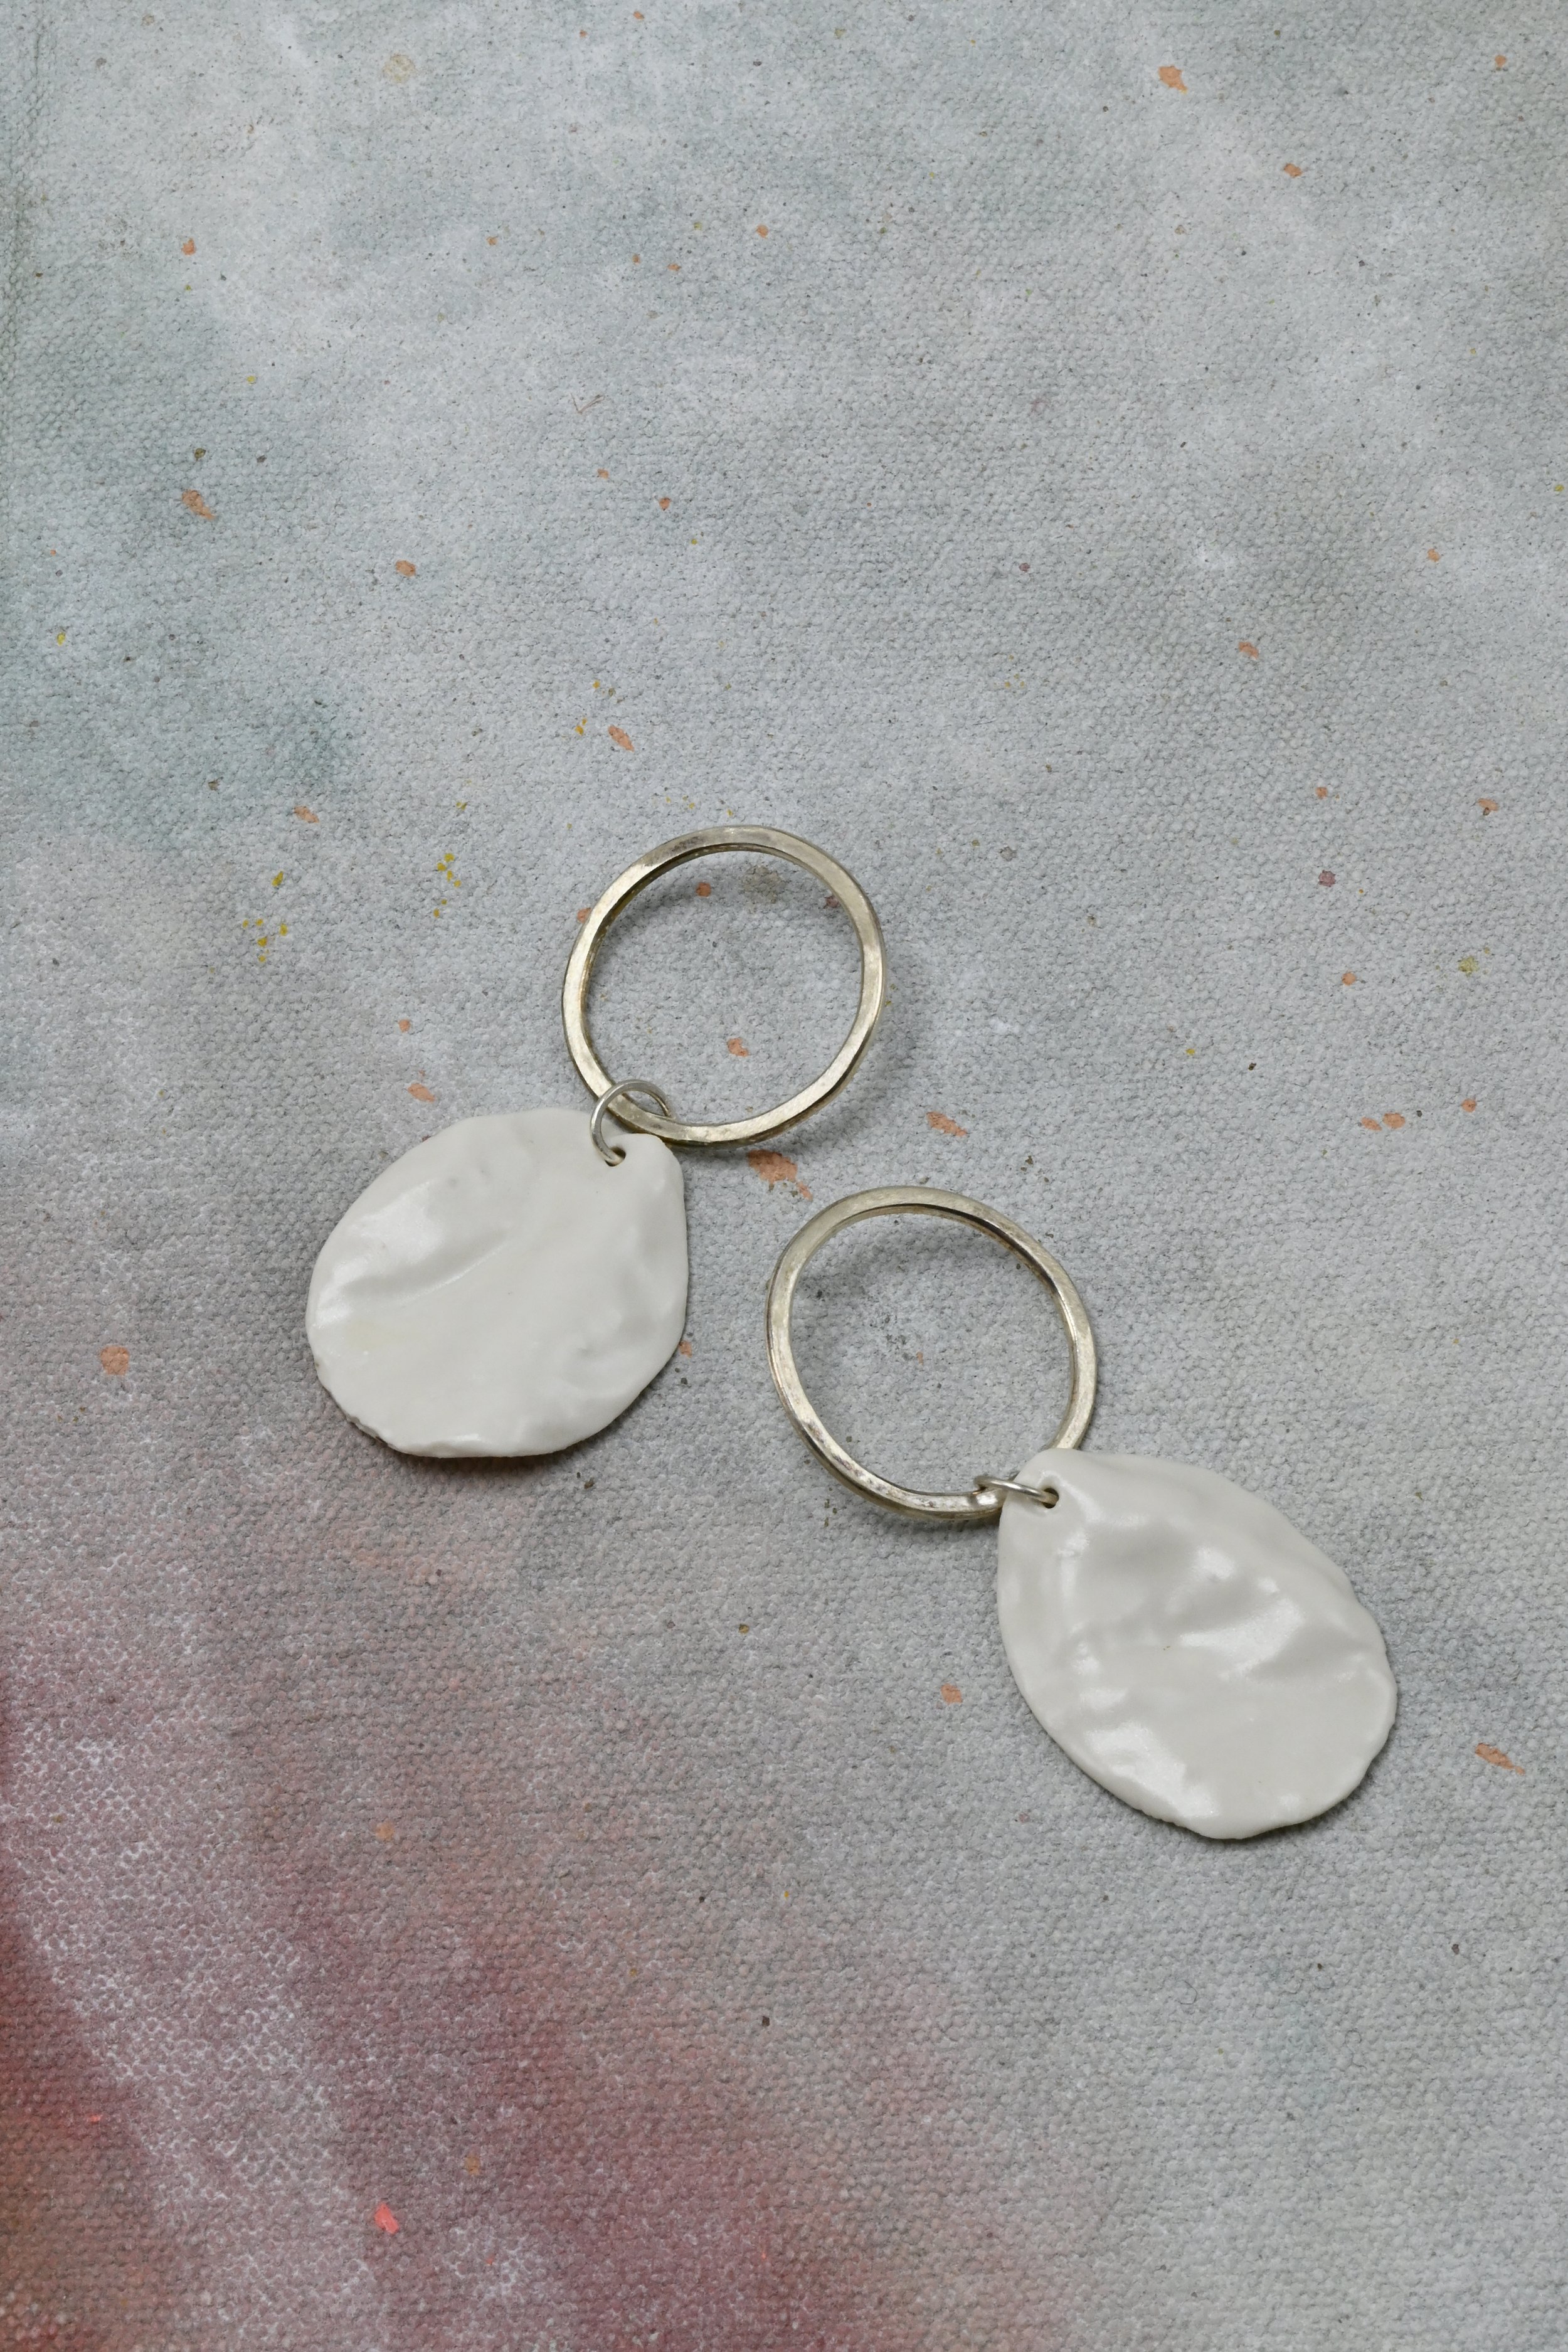 Amy Vander Els and Jenny Graf - Porcelain and Silver Earrings.jpeg